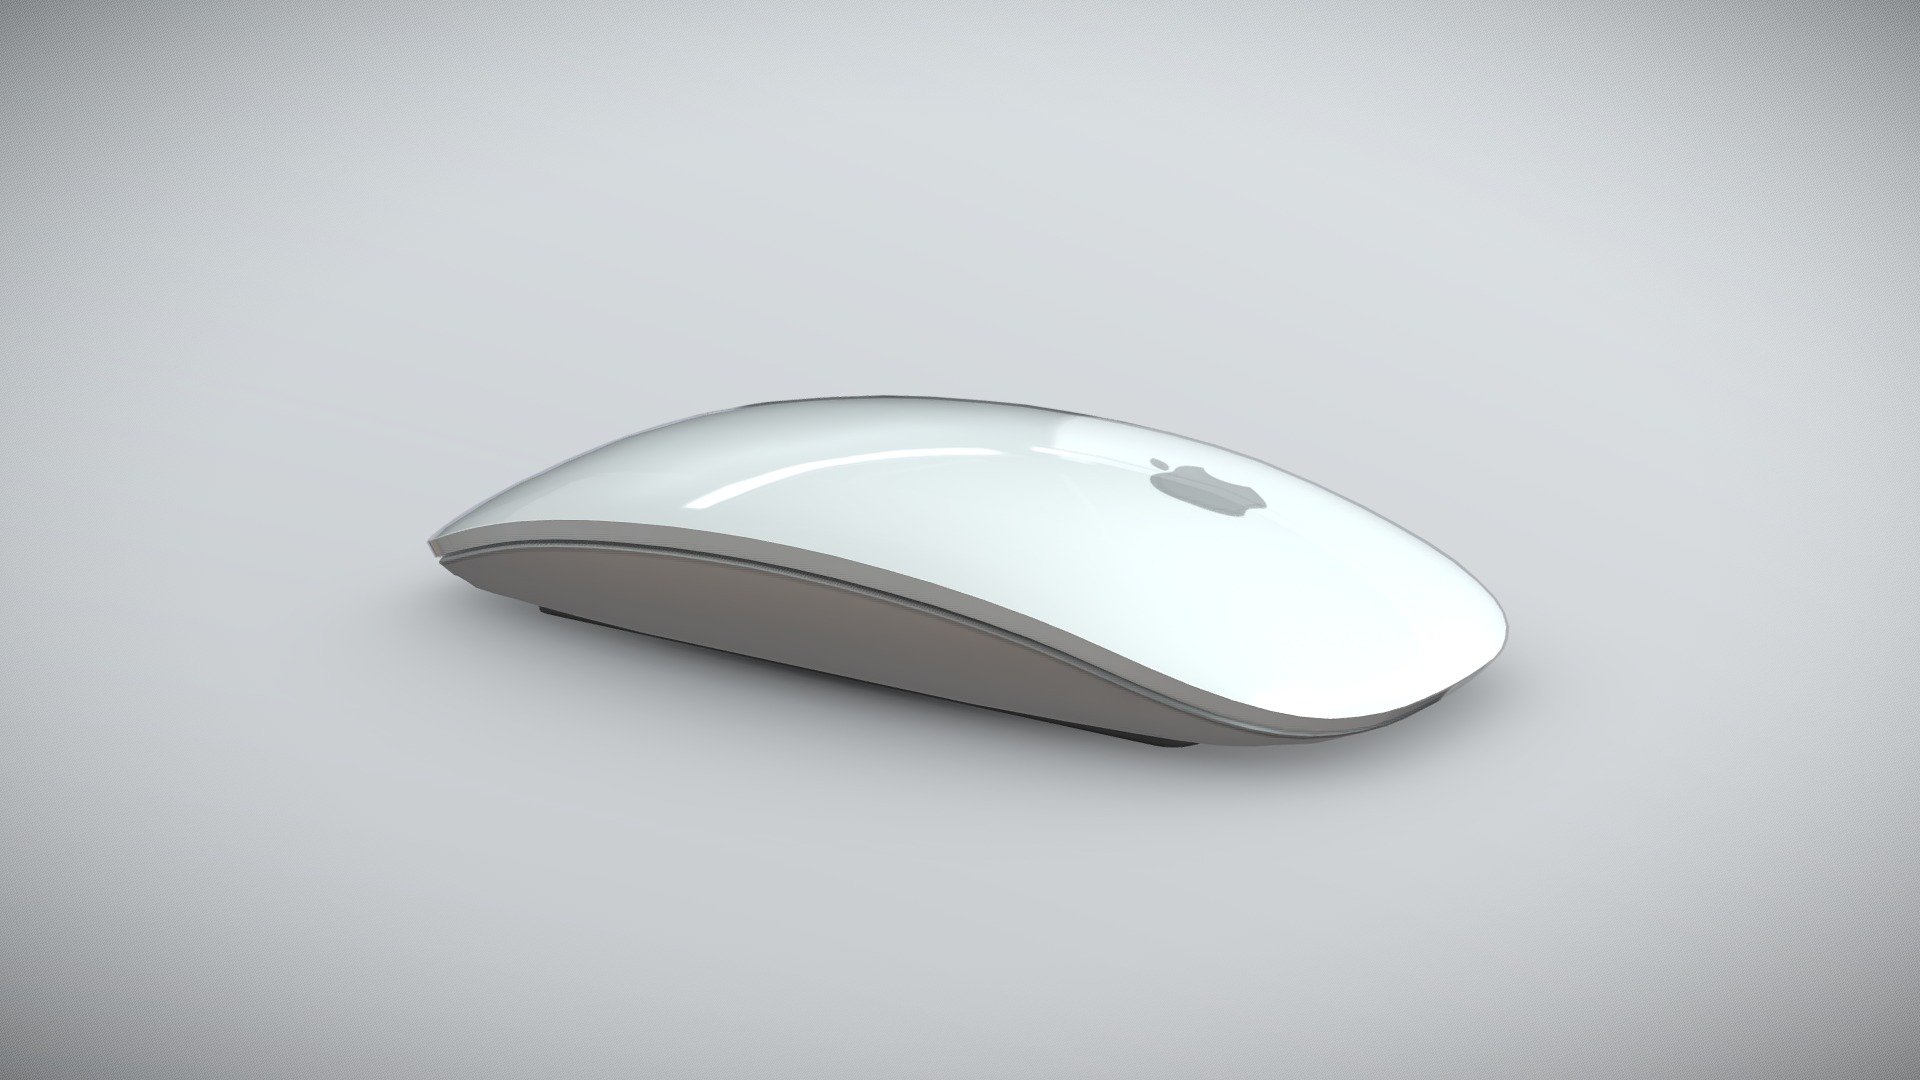 •         Let me present to you high-quality middle-poly 3D model Apple Magic Mouse. Modeling was made with ortho-photos of real mouse that is why all details of design are recreated most authentically.

•        The model uses 3 simple colored materials - 1 for glass, and 2 materials with 4 textures used in various combination and one of them is used as mask for sign, logos etc. Other textures use for bottom details.

•        The total of the main textures is 4. Resolutions of all textures are from 1024 to 2048 pixels square aspect ratio in .png format. Also there is original texture file .PSD format in separate archive.

•   Polygon count of the model is – 3264.

•   The model has correct dimensions in real-world scale.

•   To use the model in other 3D programs there are scenes in formats .fbx, .obj, .DAE, .max (2010 version).

Note: If you see some artifacts on the textures, it means compression works in the Viewer. We recommend setting HD quality for textures. But anyway, original textures have no artifacts 3d model